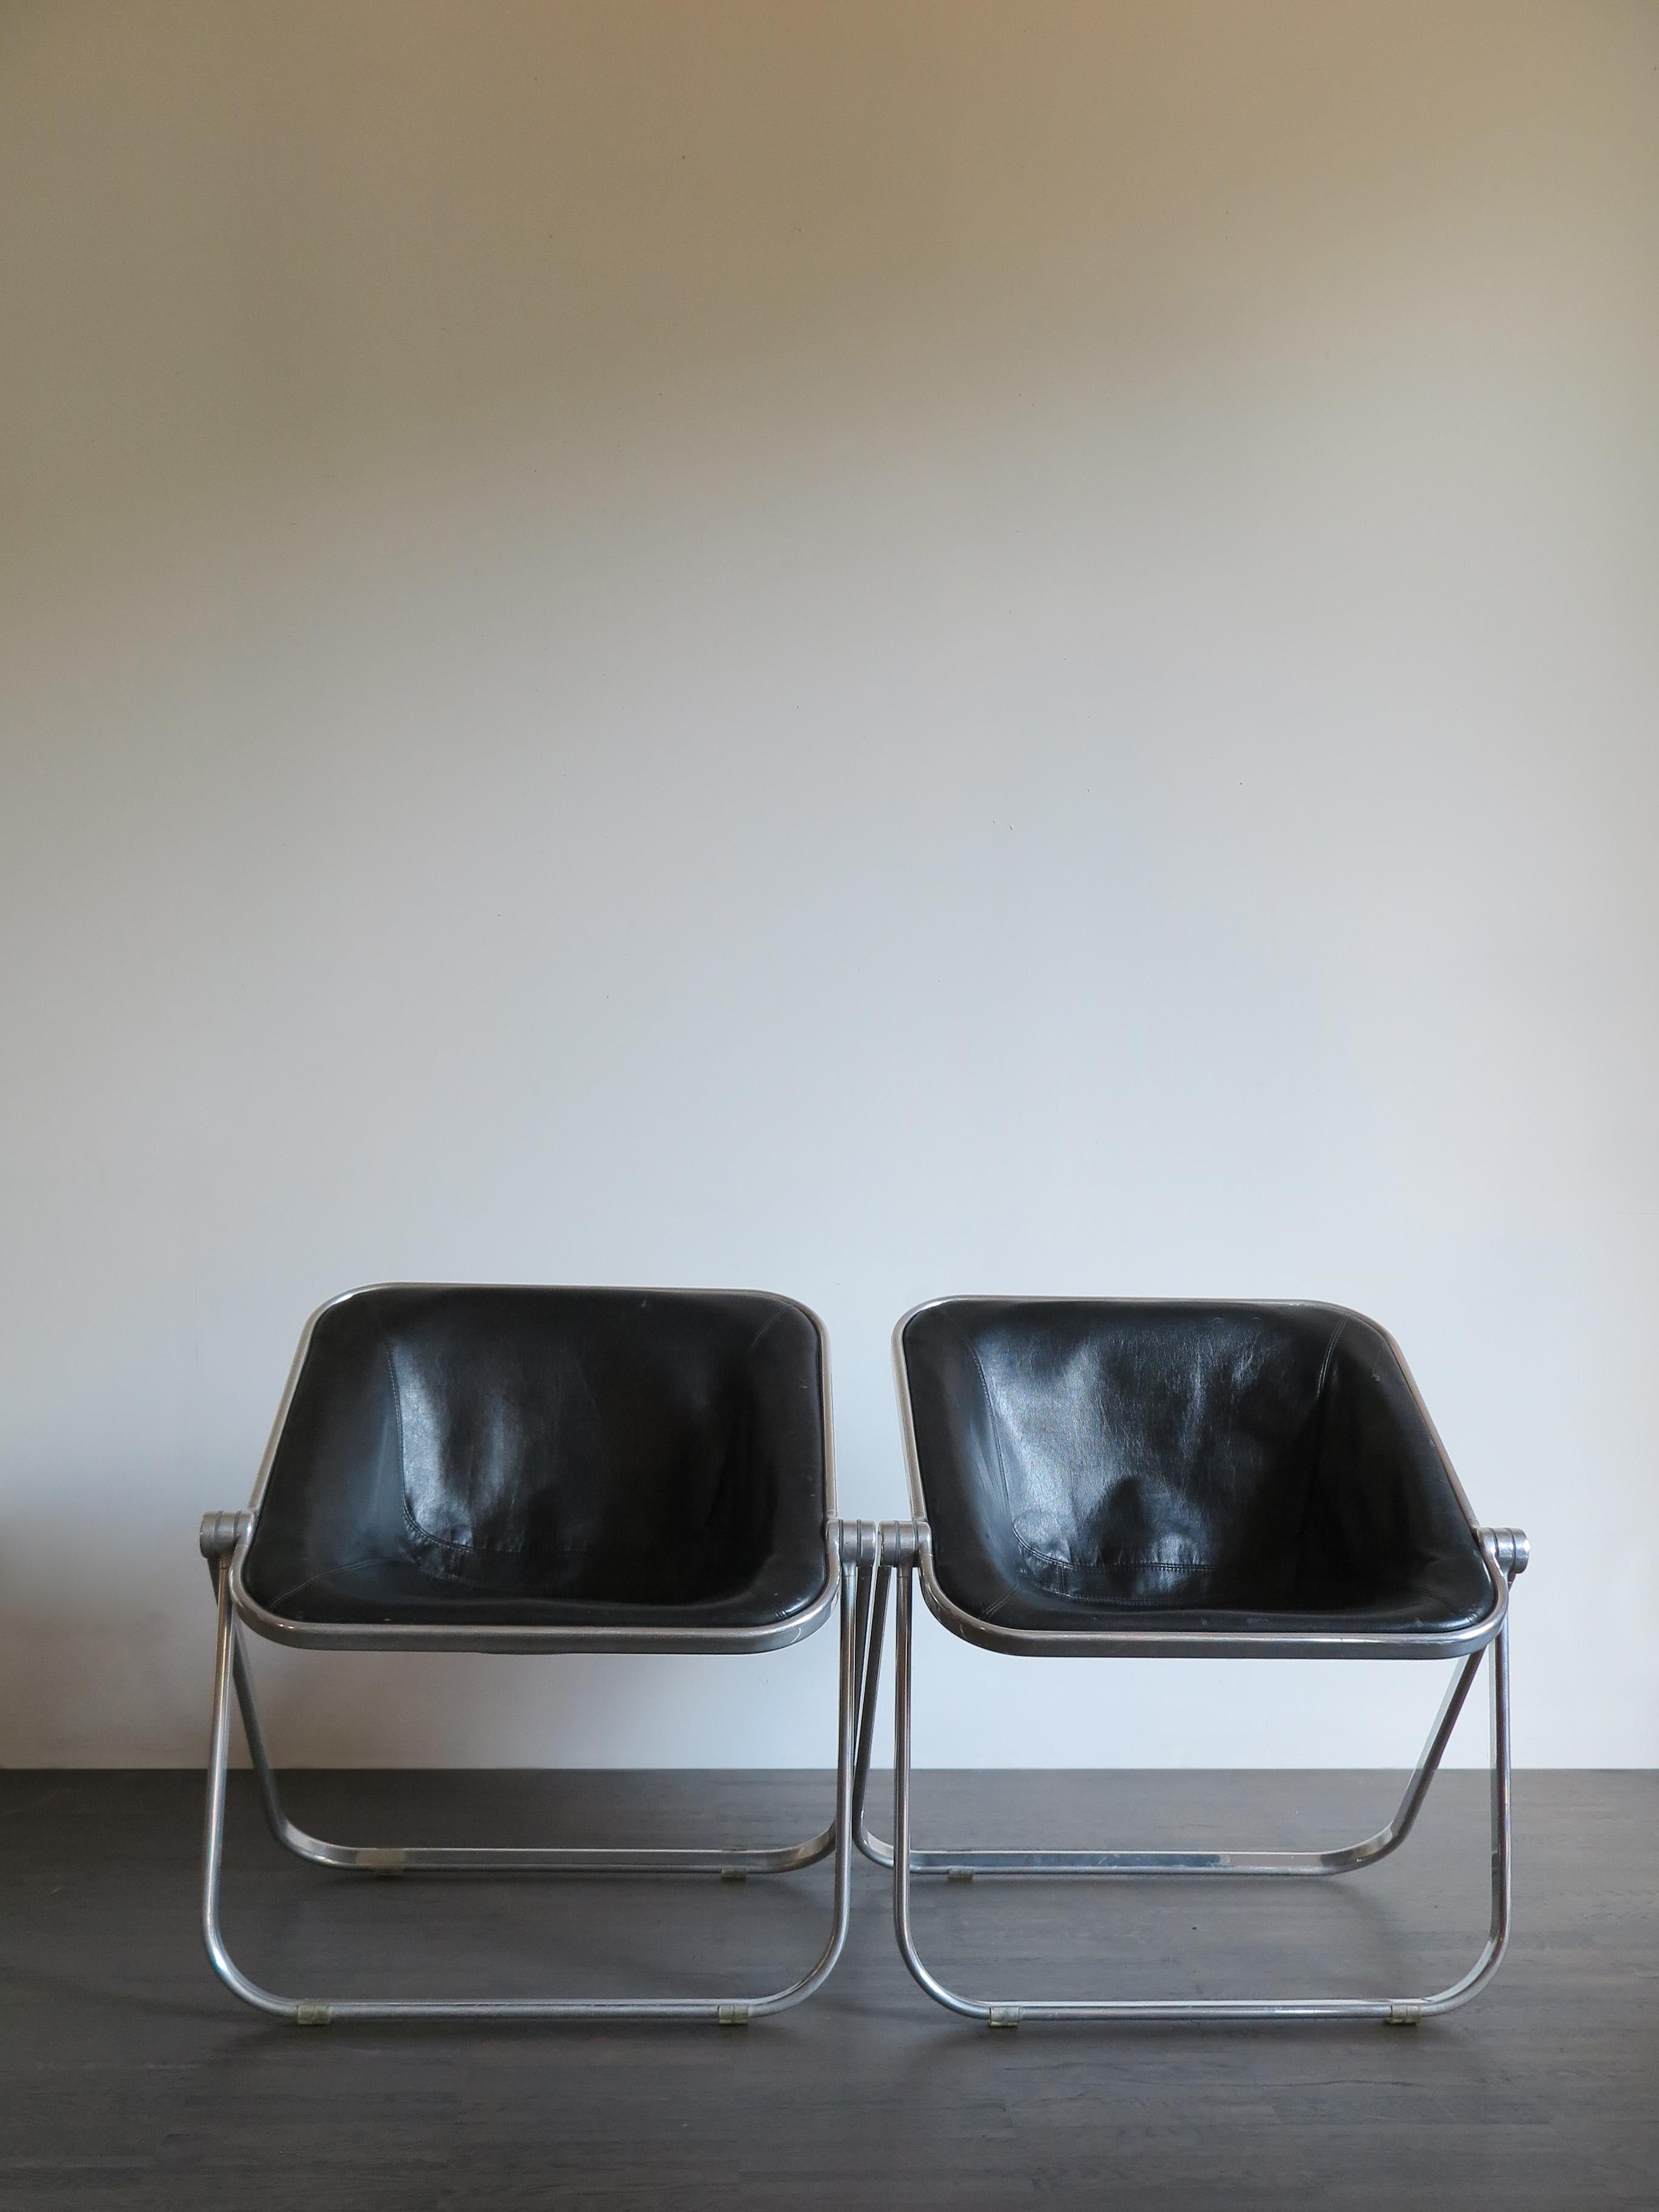 ‘Plona’ famous leather italian foldable chairs / armchairs designed by Giancarlo Piretti and produced by Anonima Castelli from 1969, the armchairs consist of an aluminium frame and upholstered in black leather shell, the aluminum shows some songs